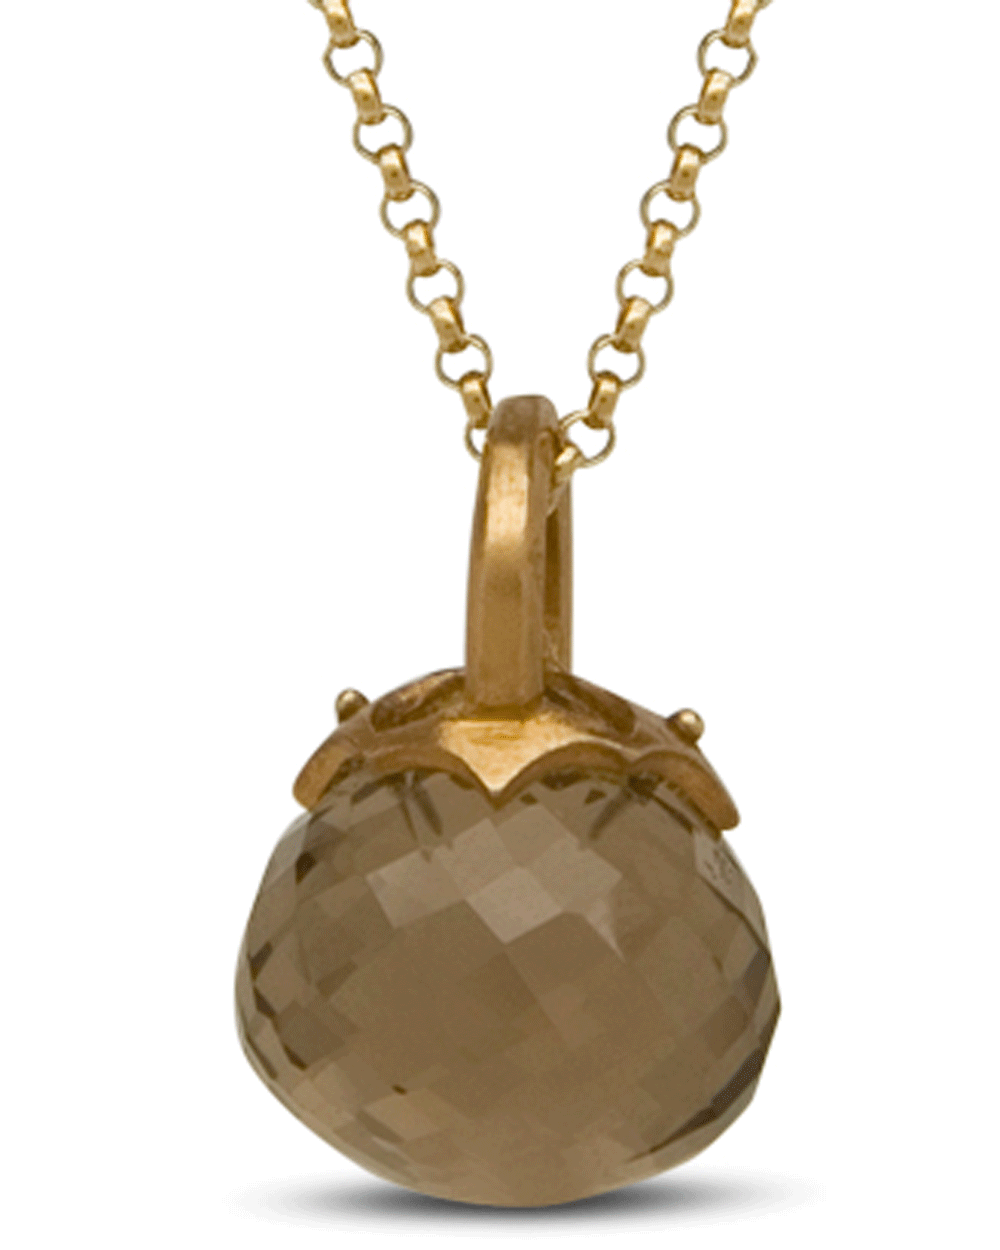 18k Yellow Gold Bell Jar Necklace